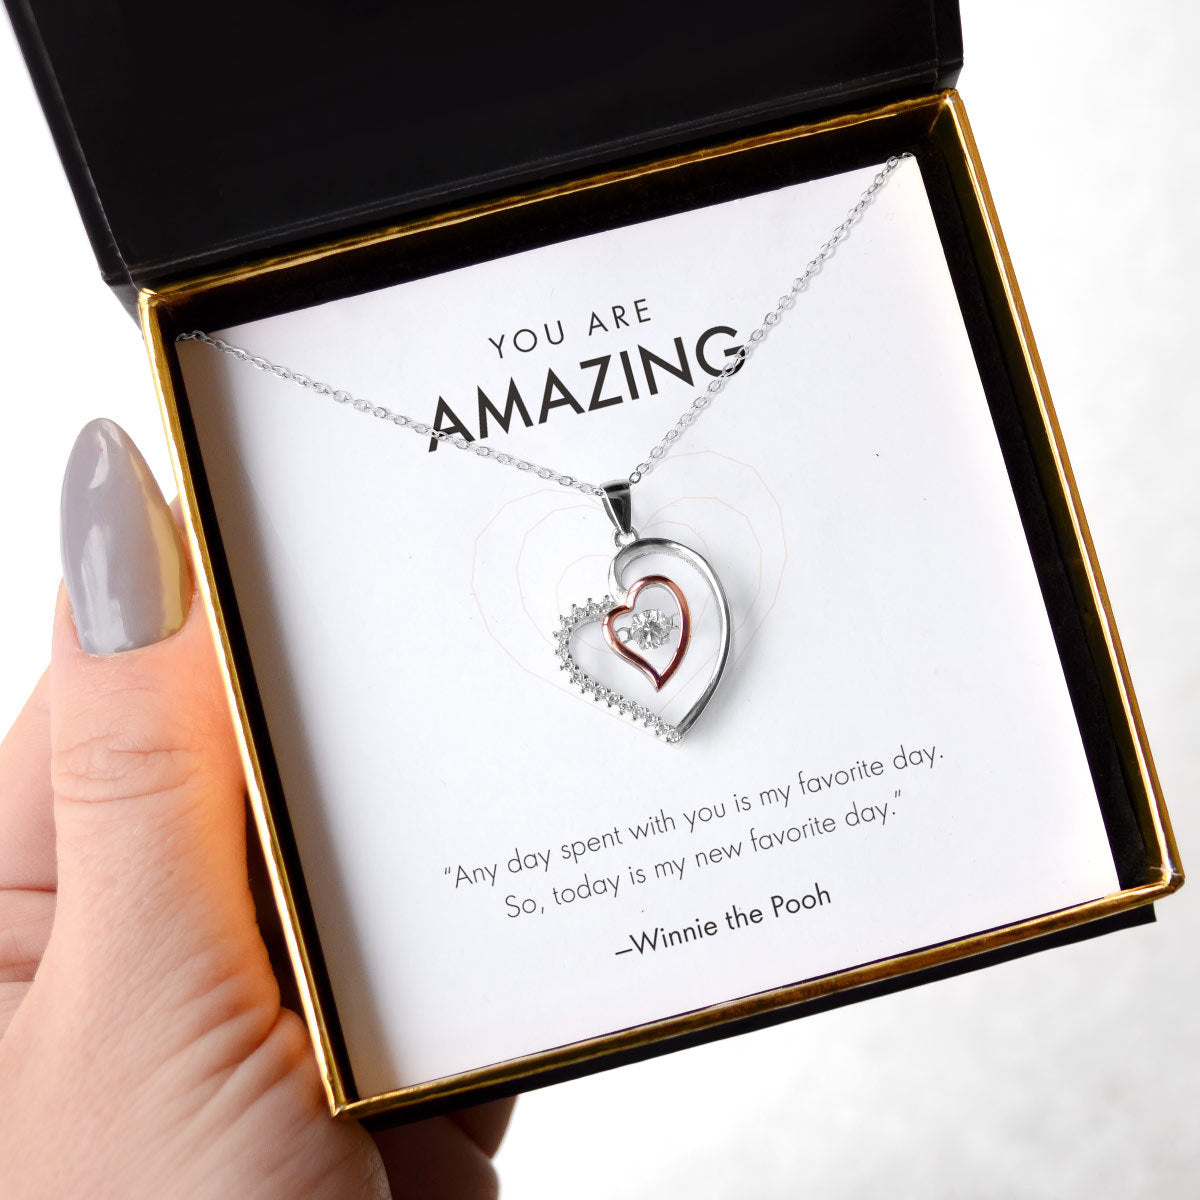 You Are Amazing - Luxe Heart Pendant Necklace Gift Set